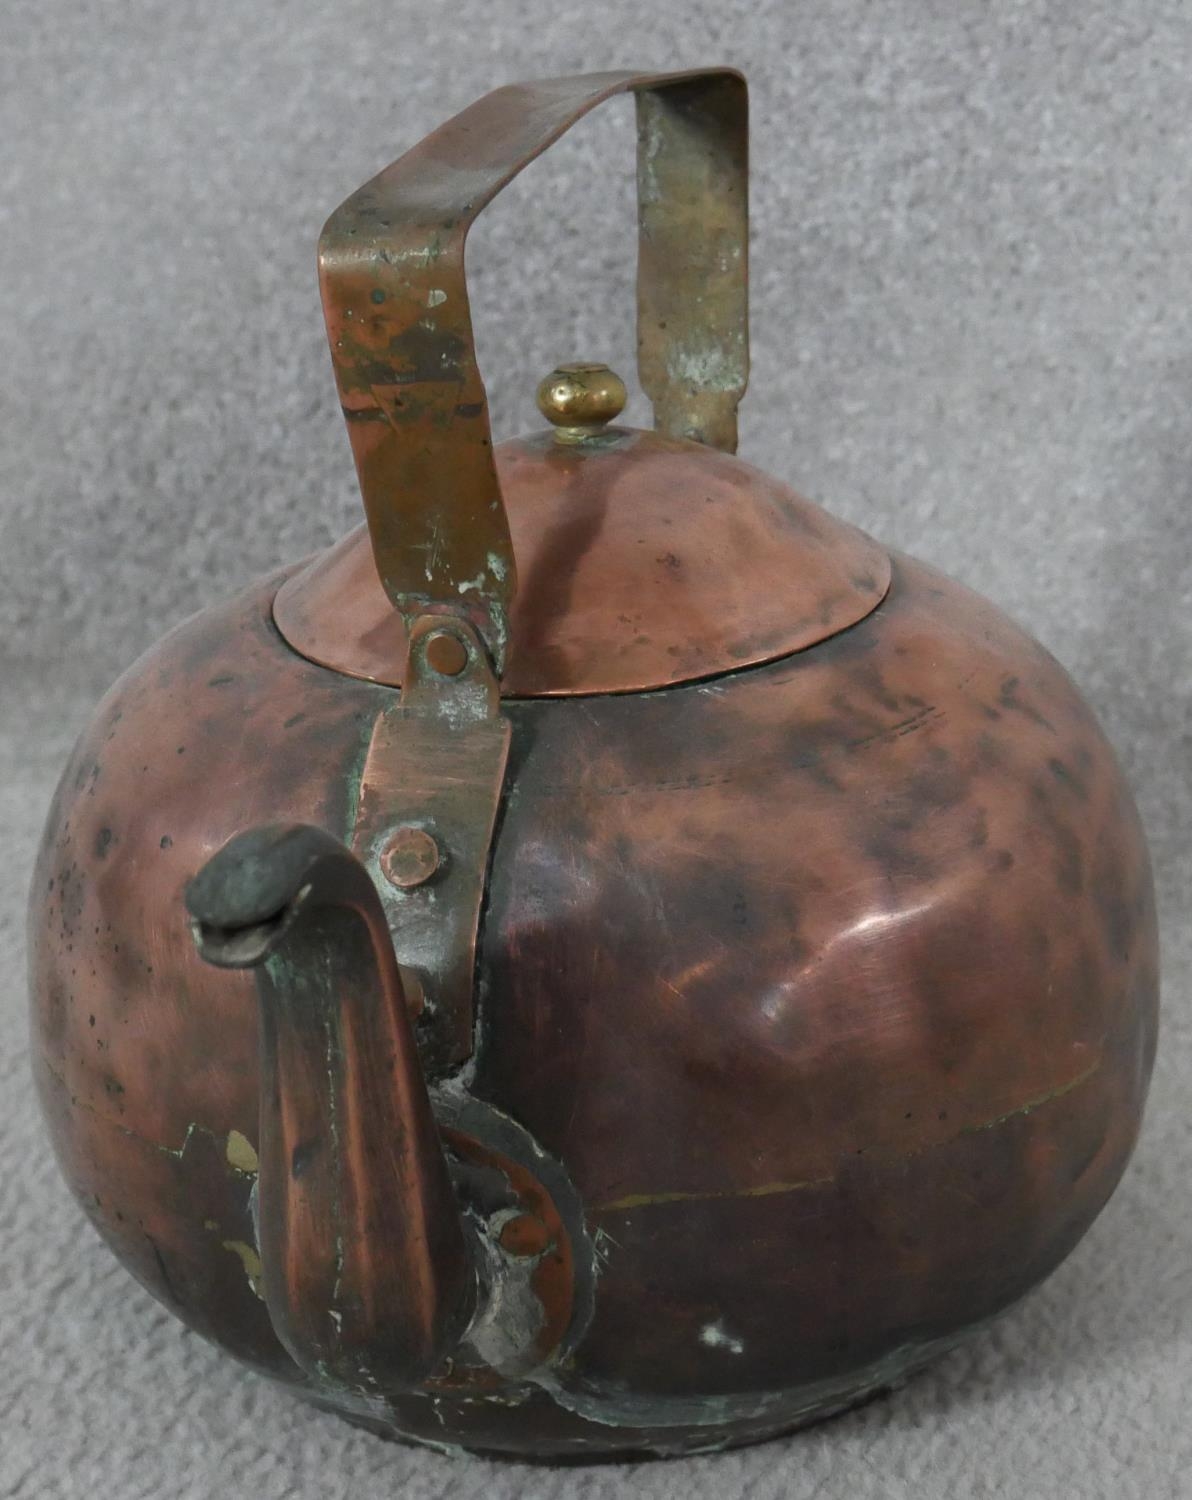 A brass and copper coal scuttle, a copper pan and teapot, a vintage coffee grinder and a 2lb weight. - Image 3 of 8